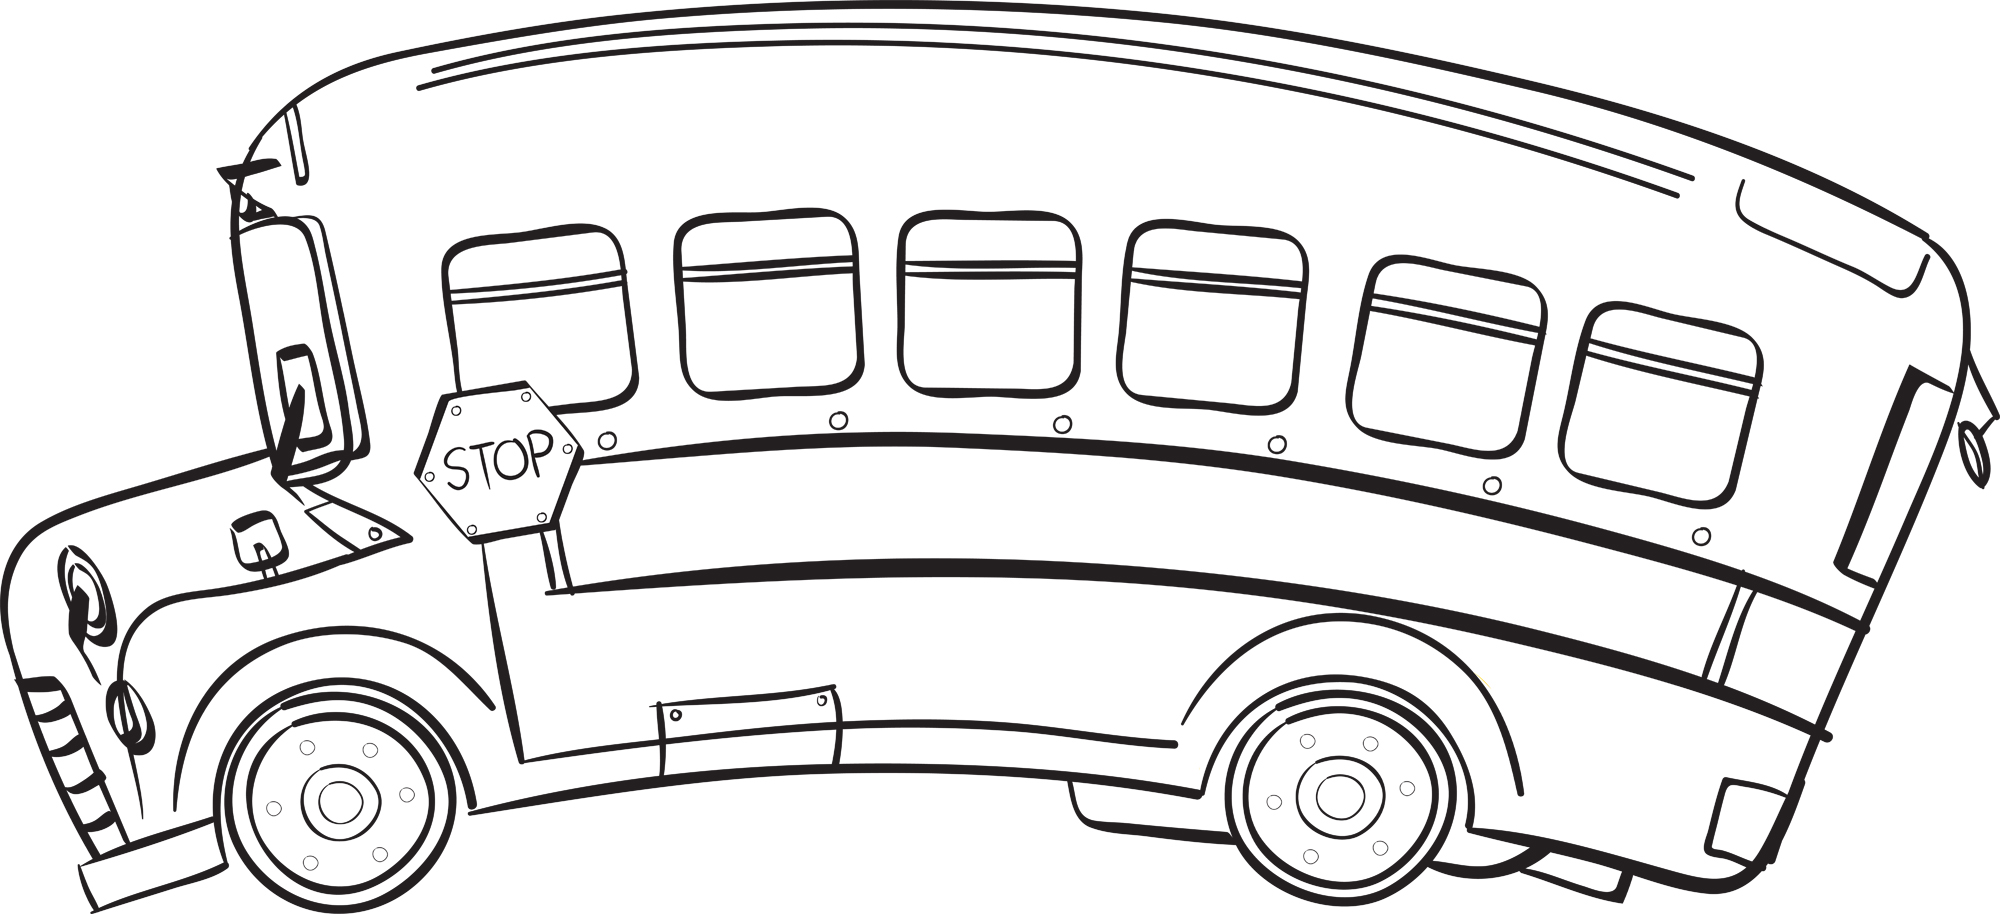 Bus  black and white school bus clipart black and white wikiclipart